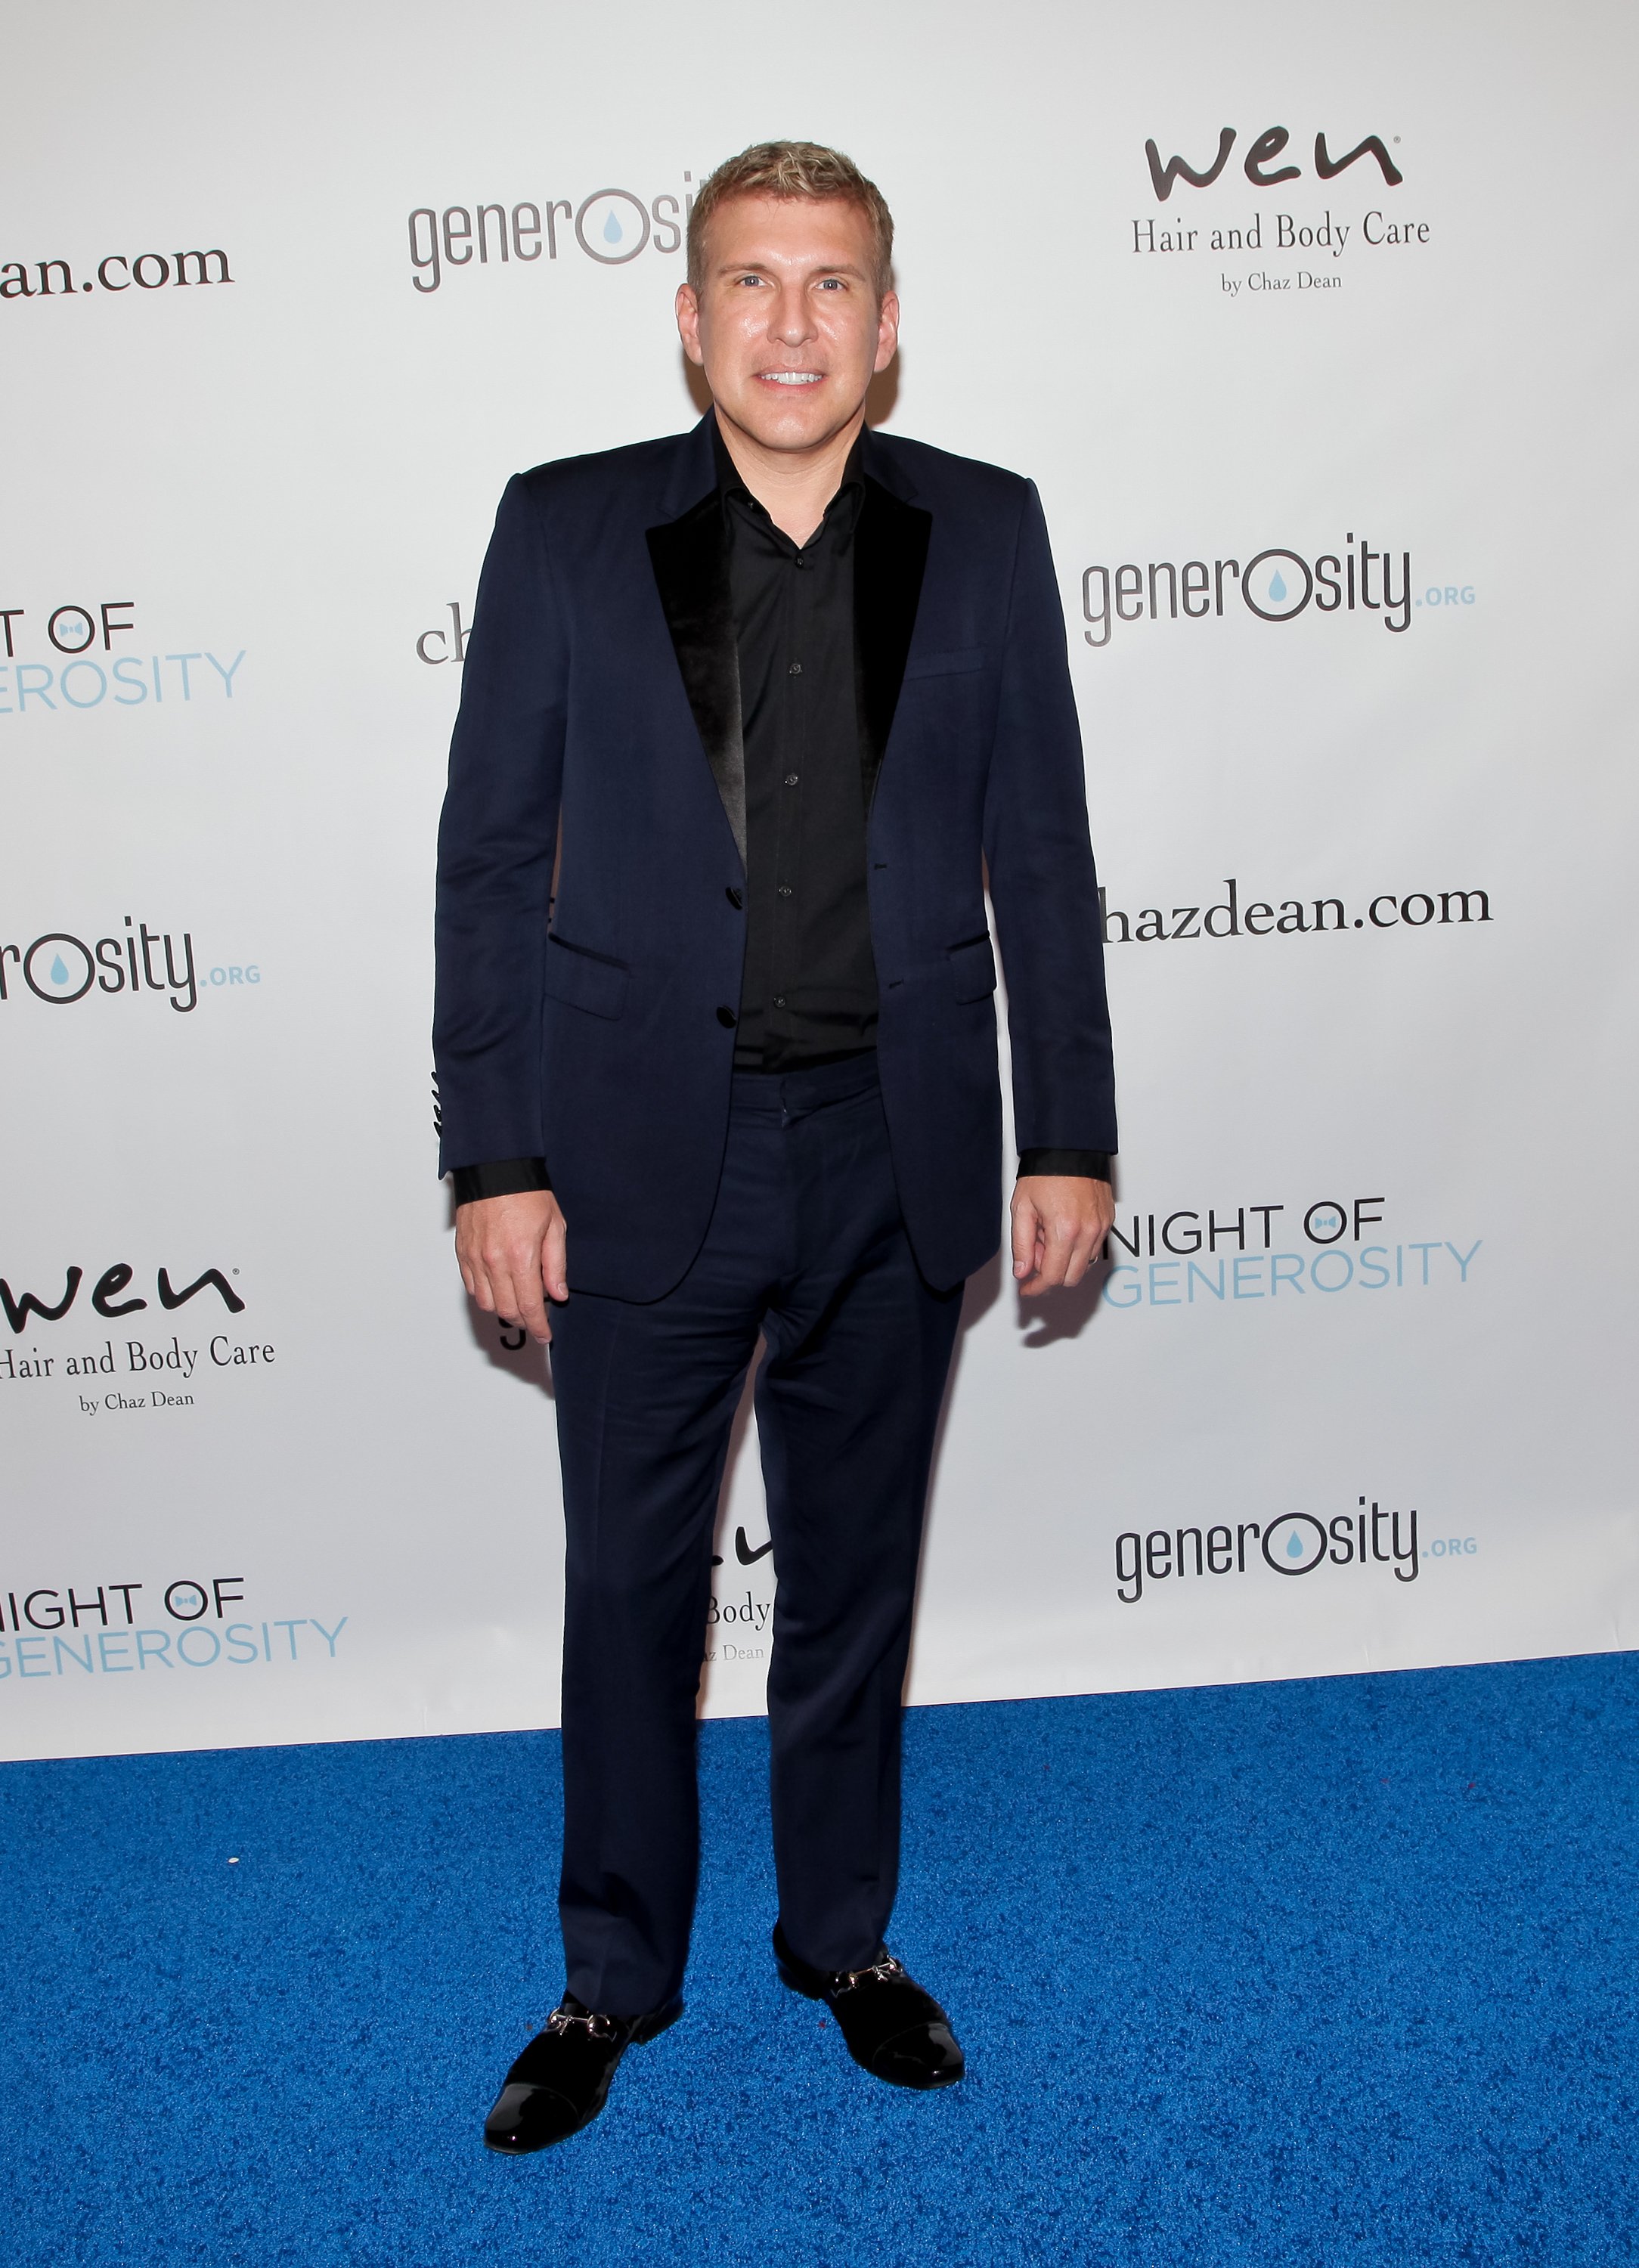 Todd Chrisley attends the 7th Annual Night of Generosity Gala benefiting generosity.org at the Beverly Wilshire Four Seasons Hotel on November 6, 2015, in Beverly Hills, California. | Source: Getty Images